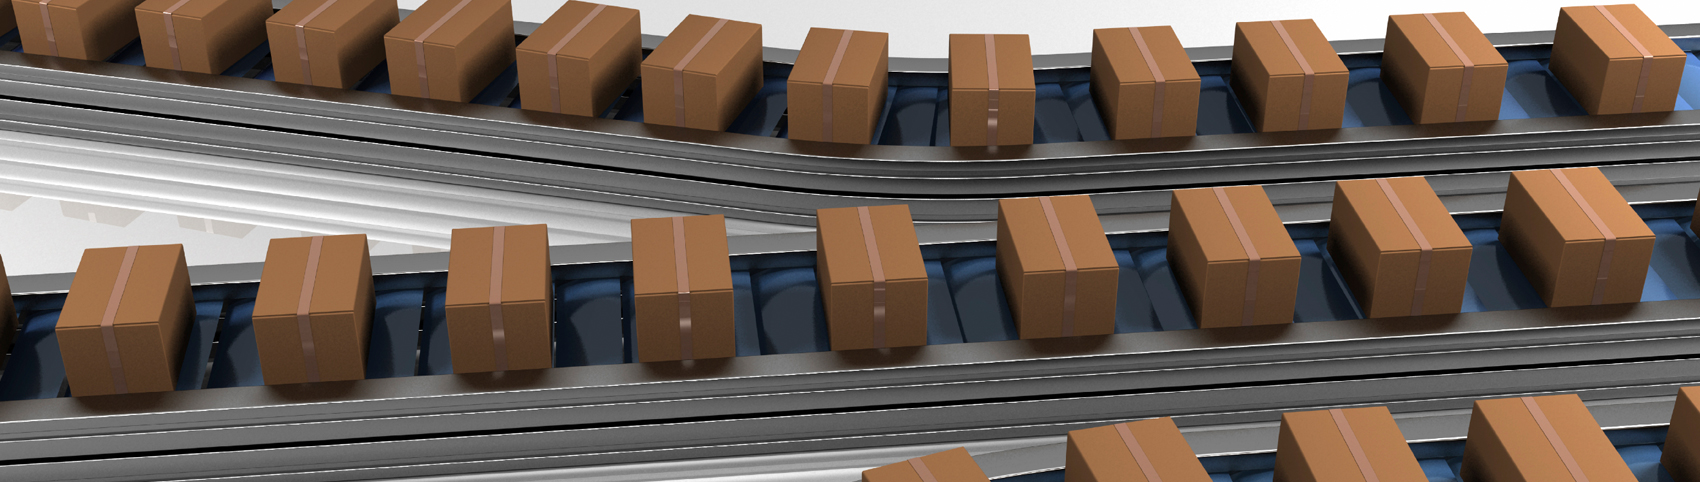 Production line with boxes